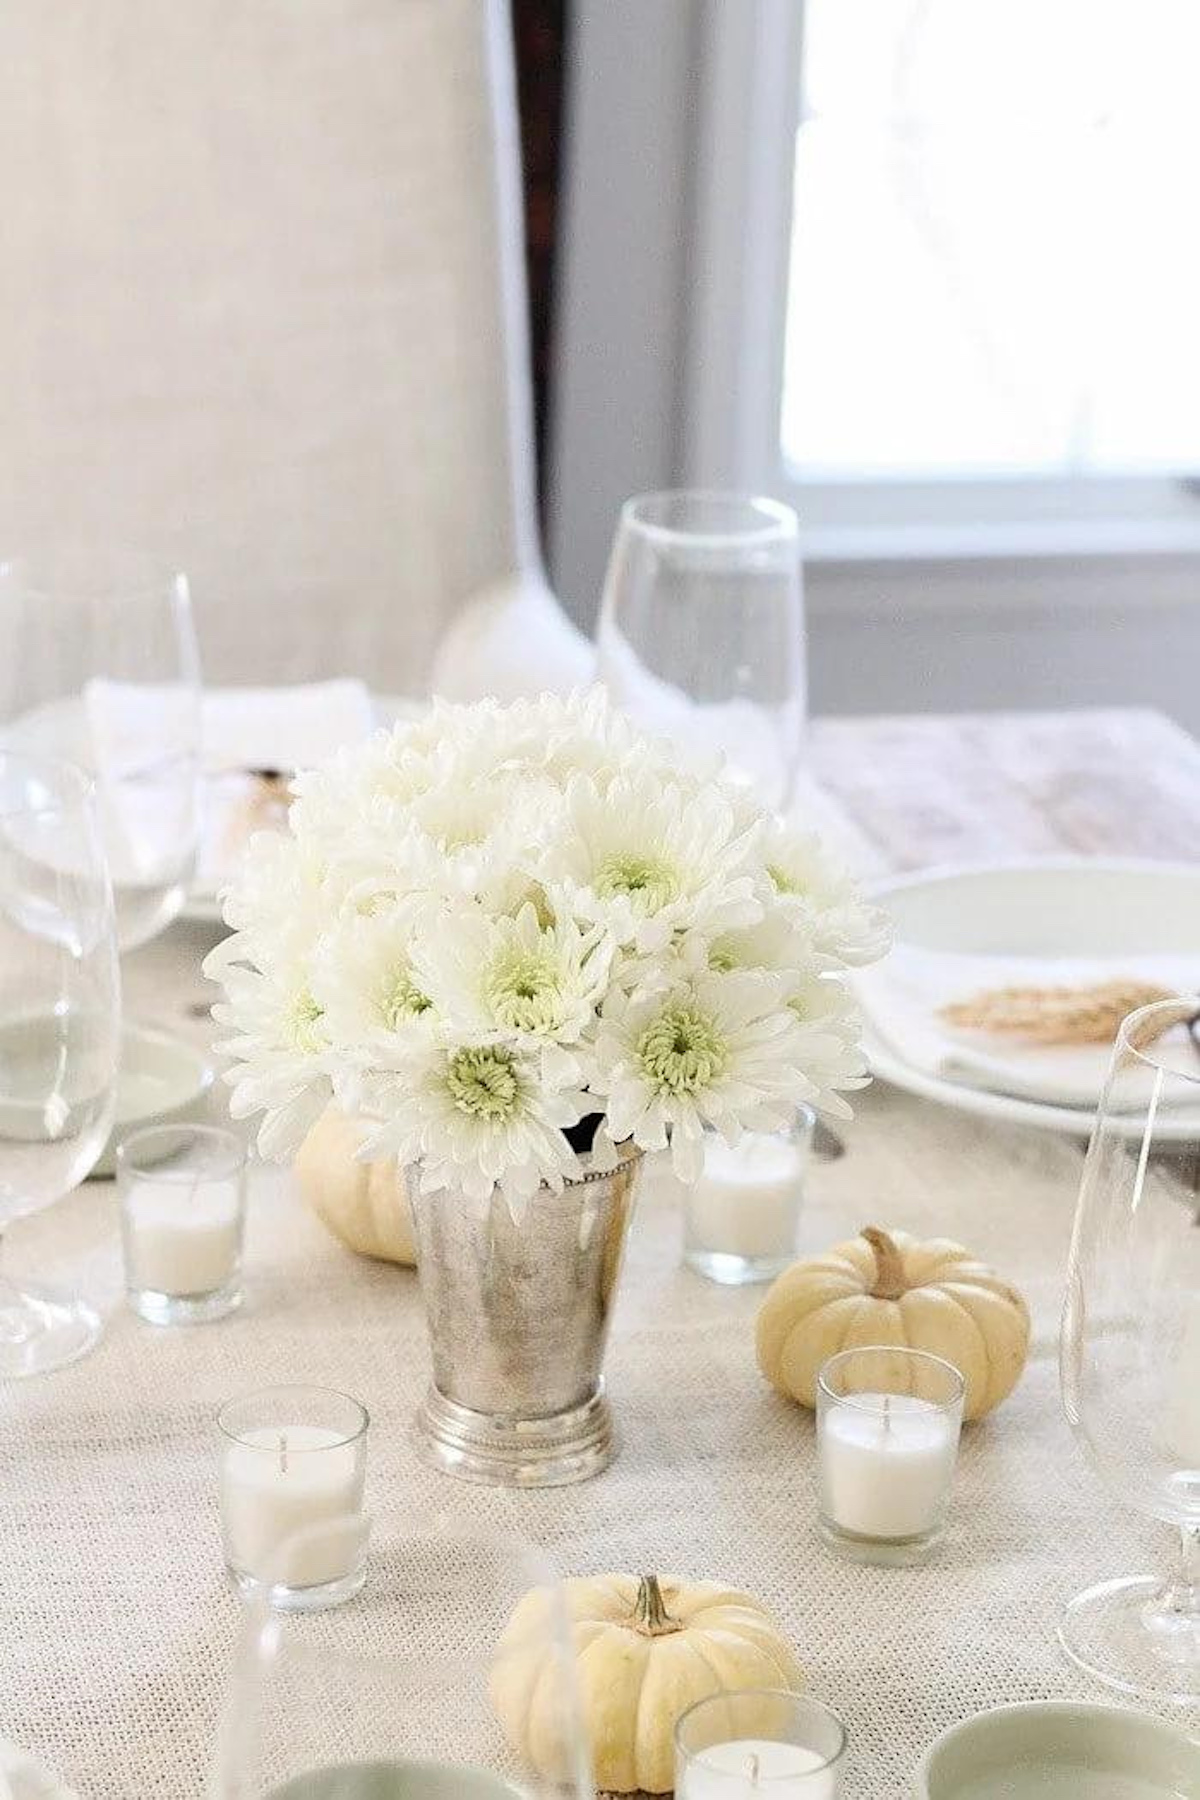 Thanksgiving table setting with white flowers, pumpkins, and Thanksgiving centerpieces.